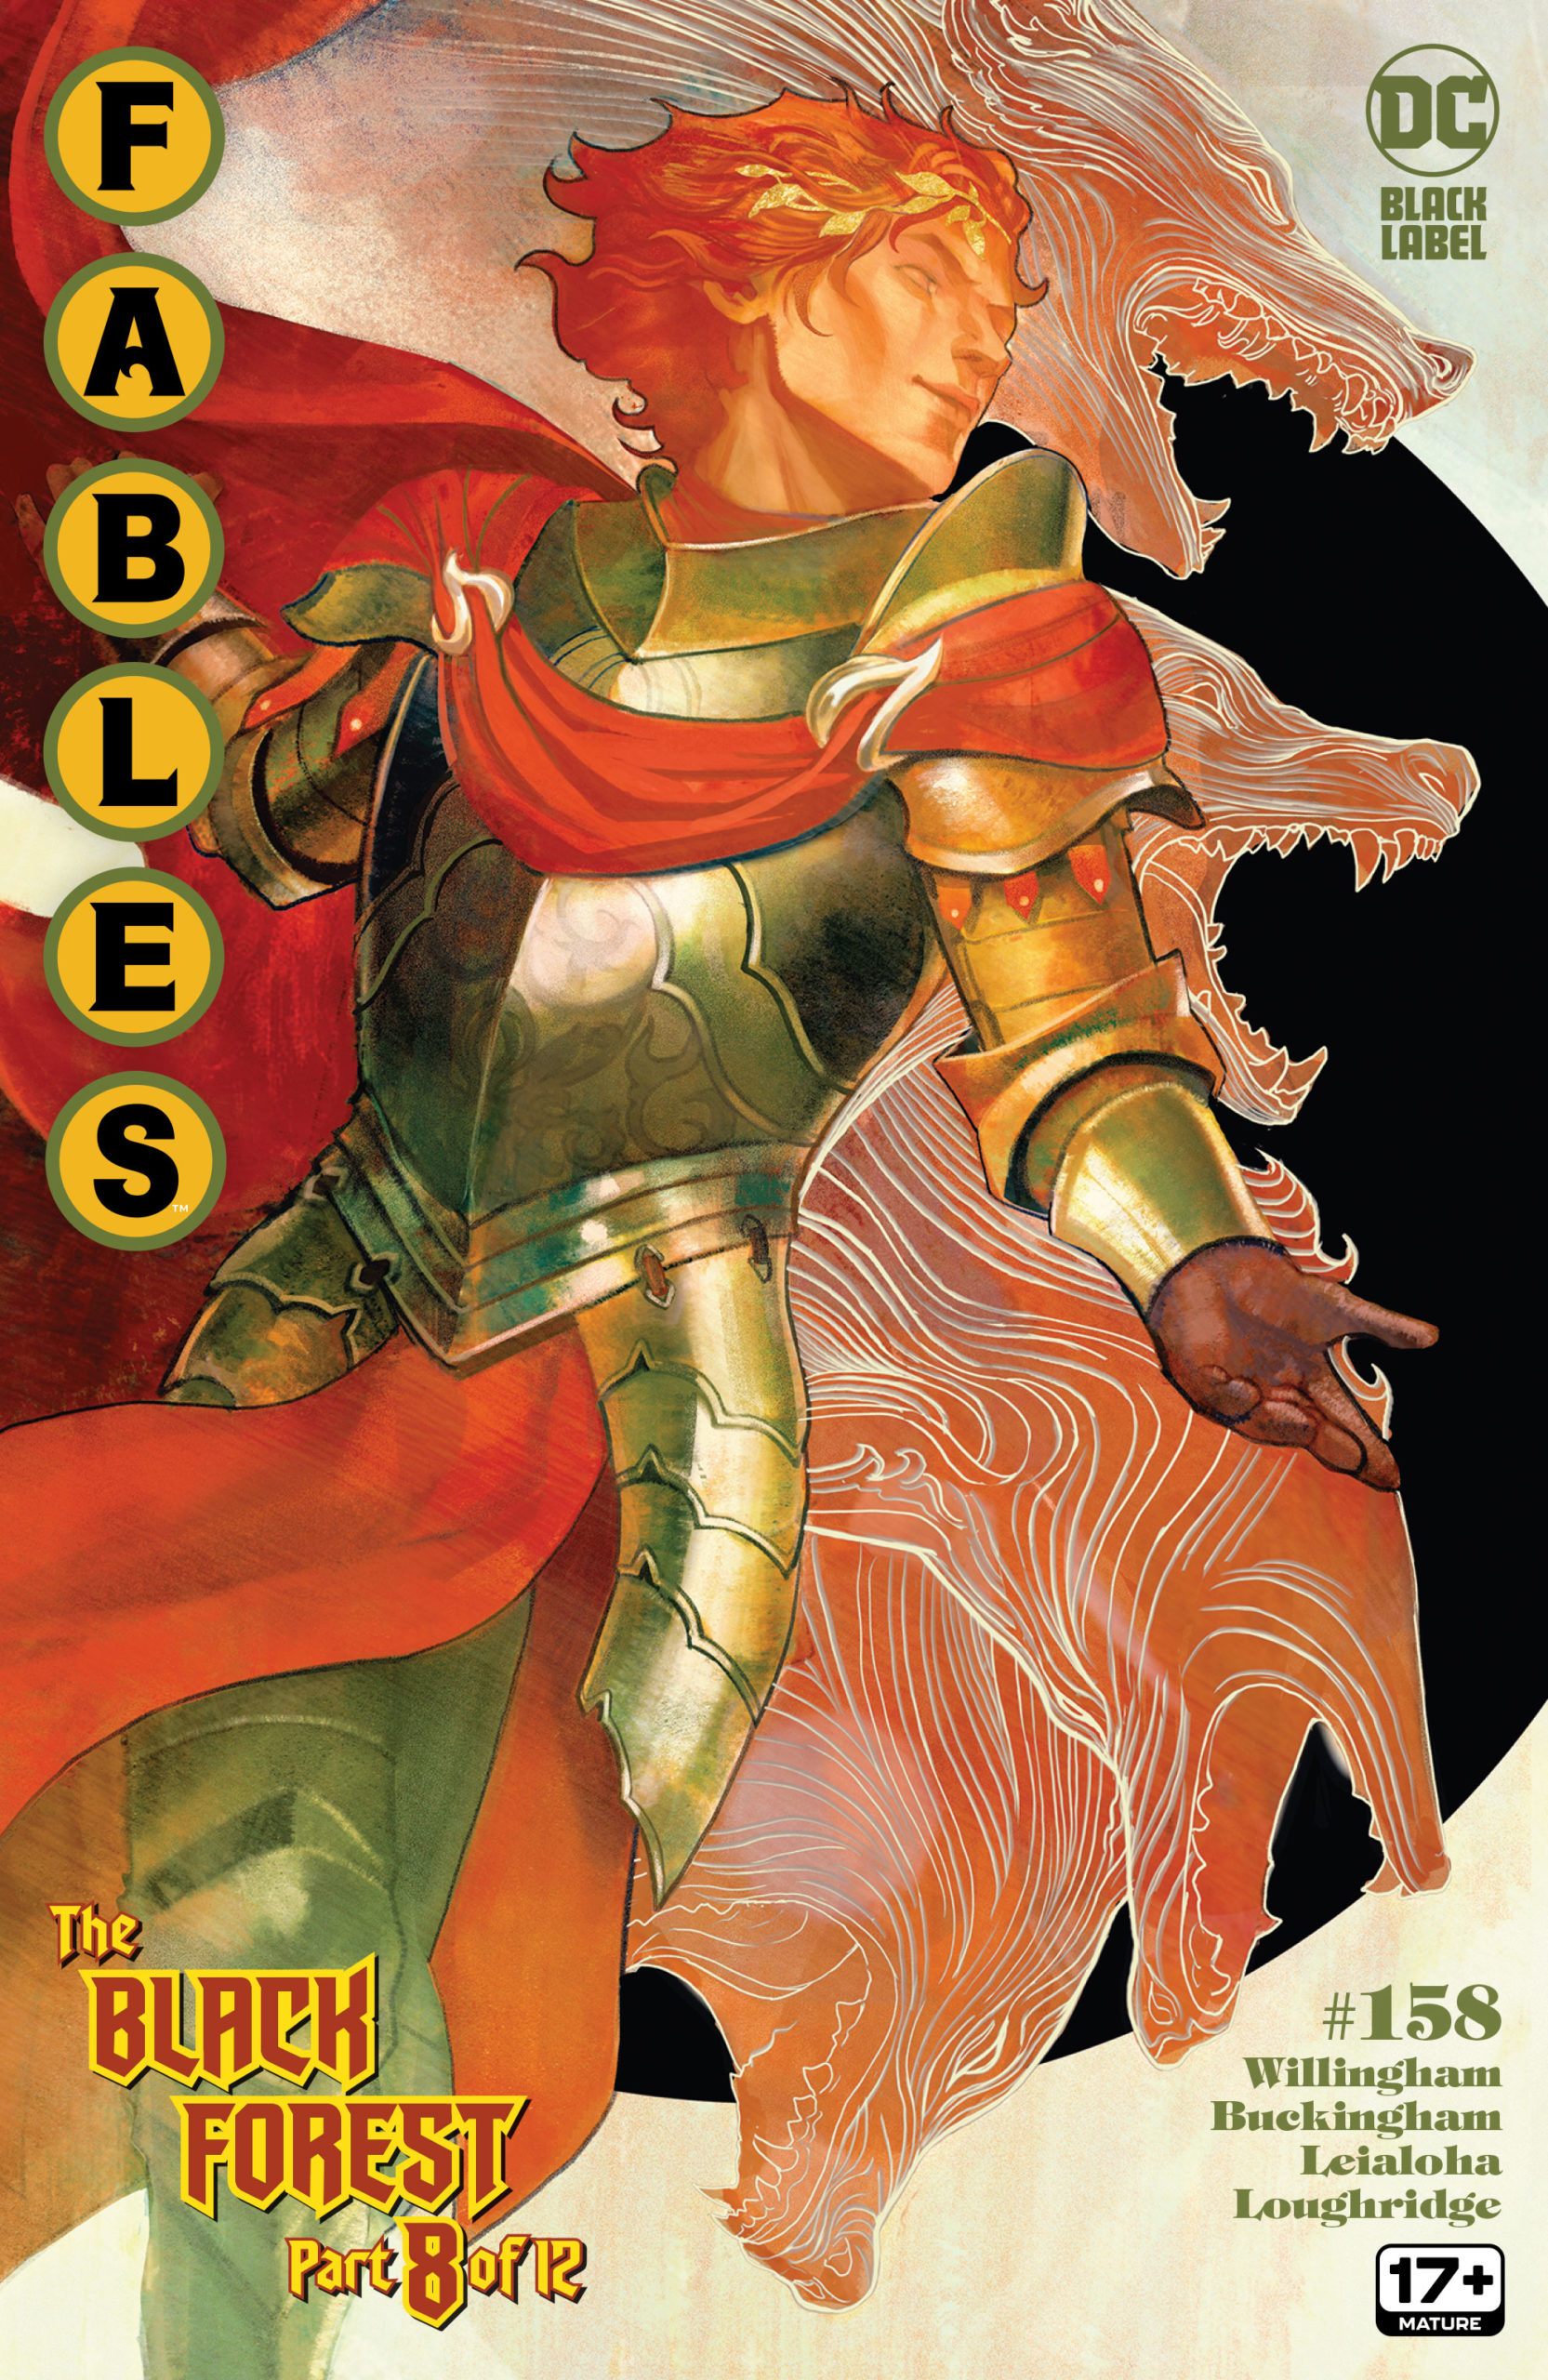 Fables #158